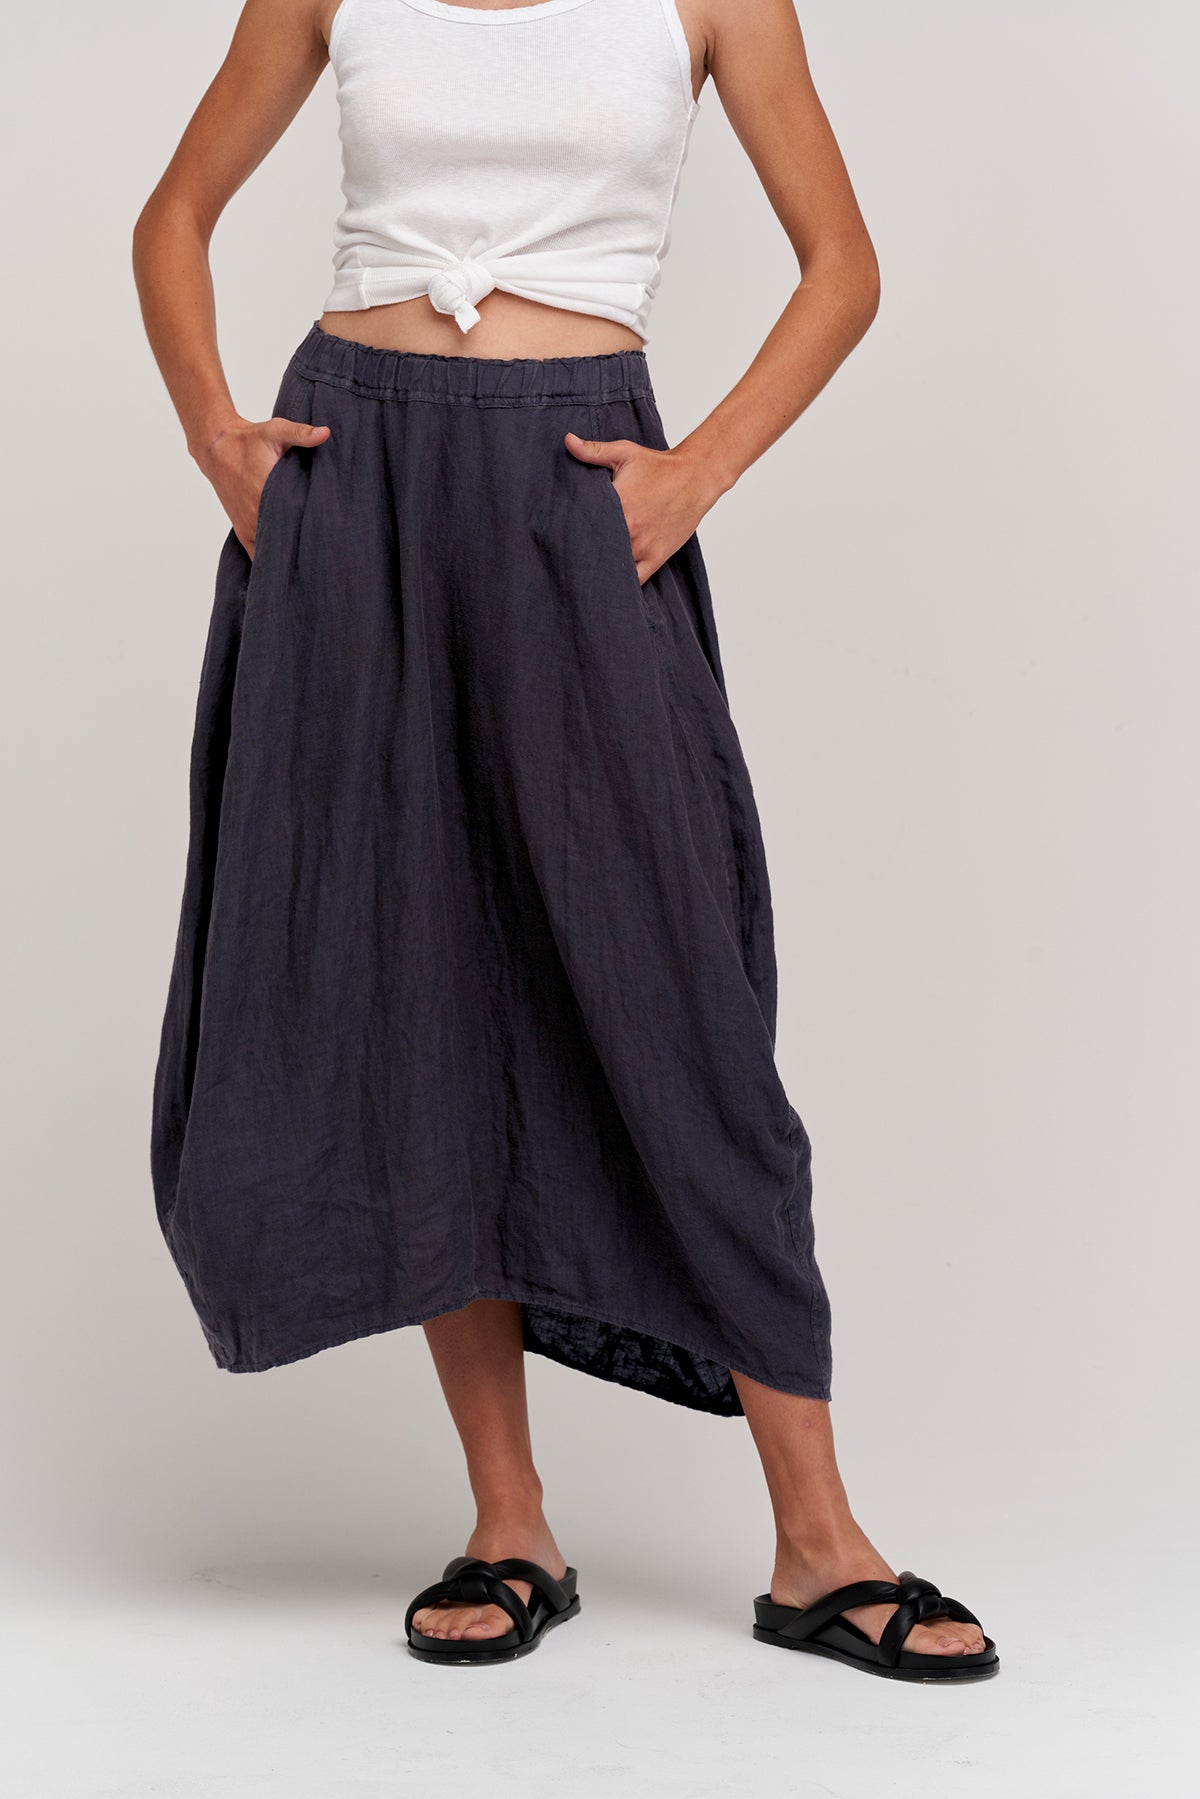 The model is wearing a Velvet by Graham & Spencer FAE LINEN A-LINE SKIRT with pockets.-35954052006081